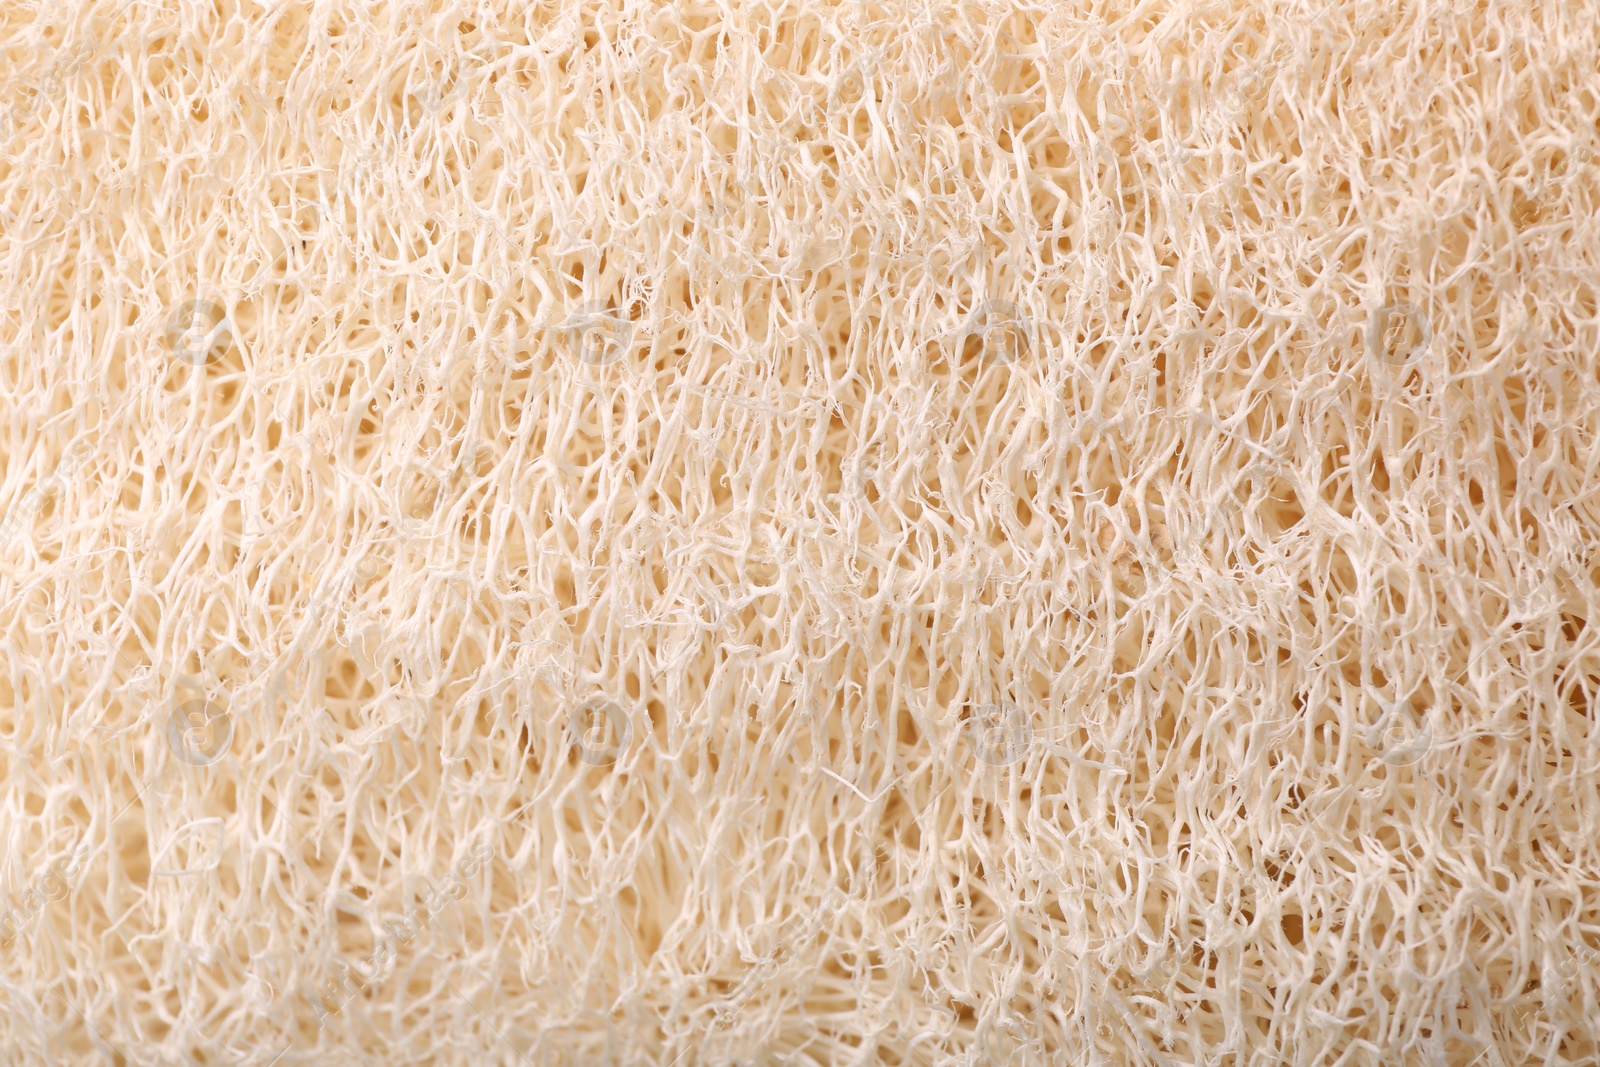 Photo of Loofah sponge as background, top view. Personal hygiene product